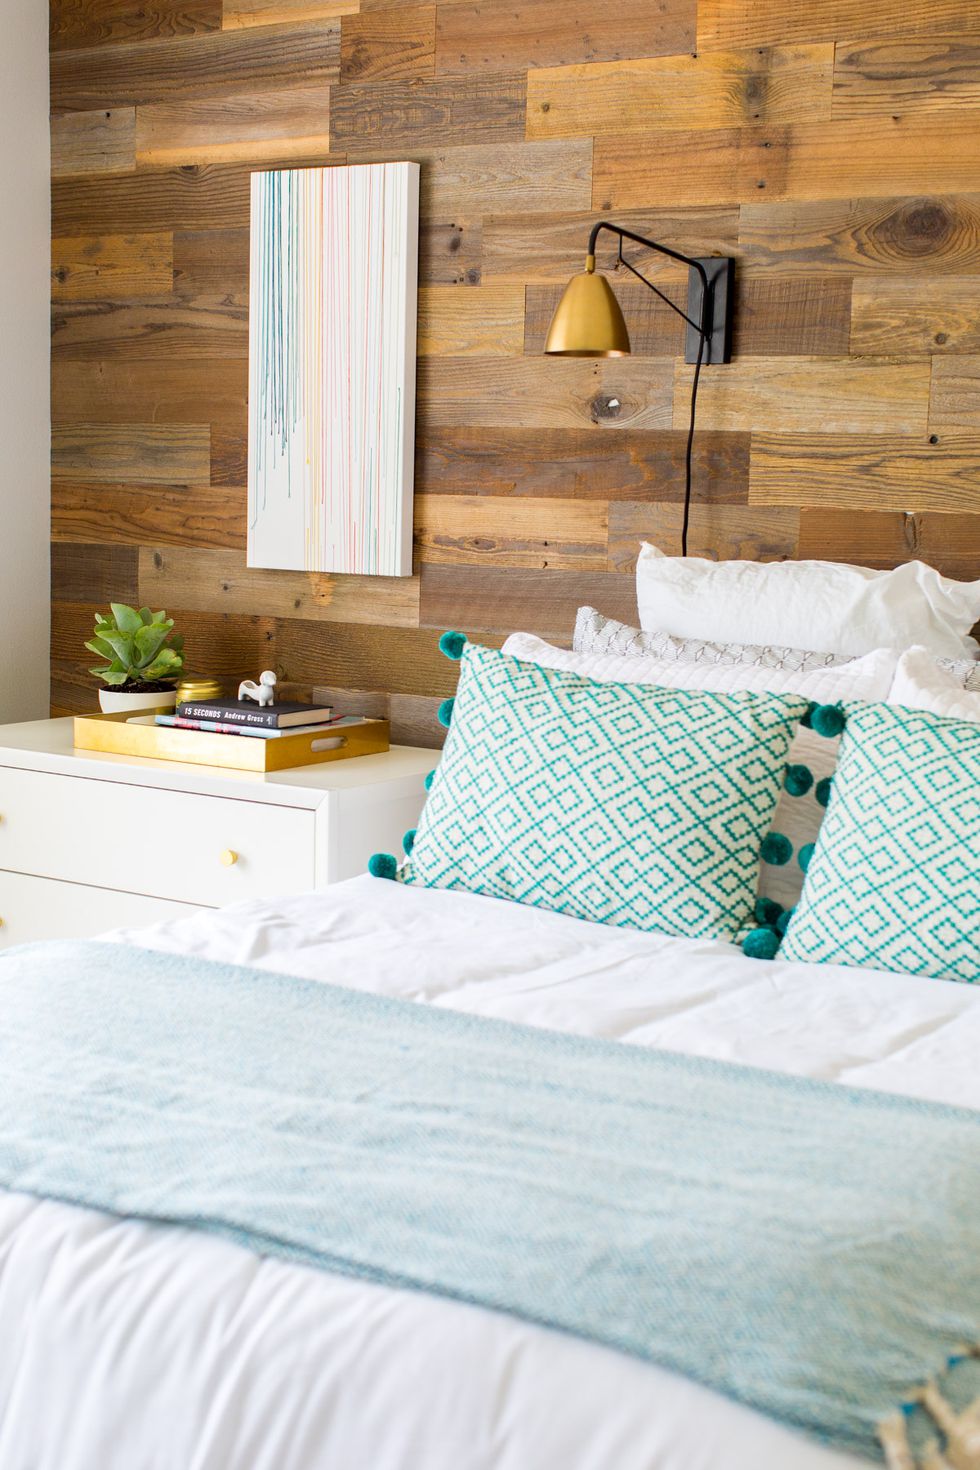 Save Space By Converting Your Wall Into A Headboard